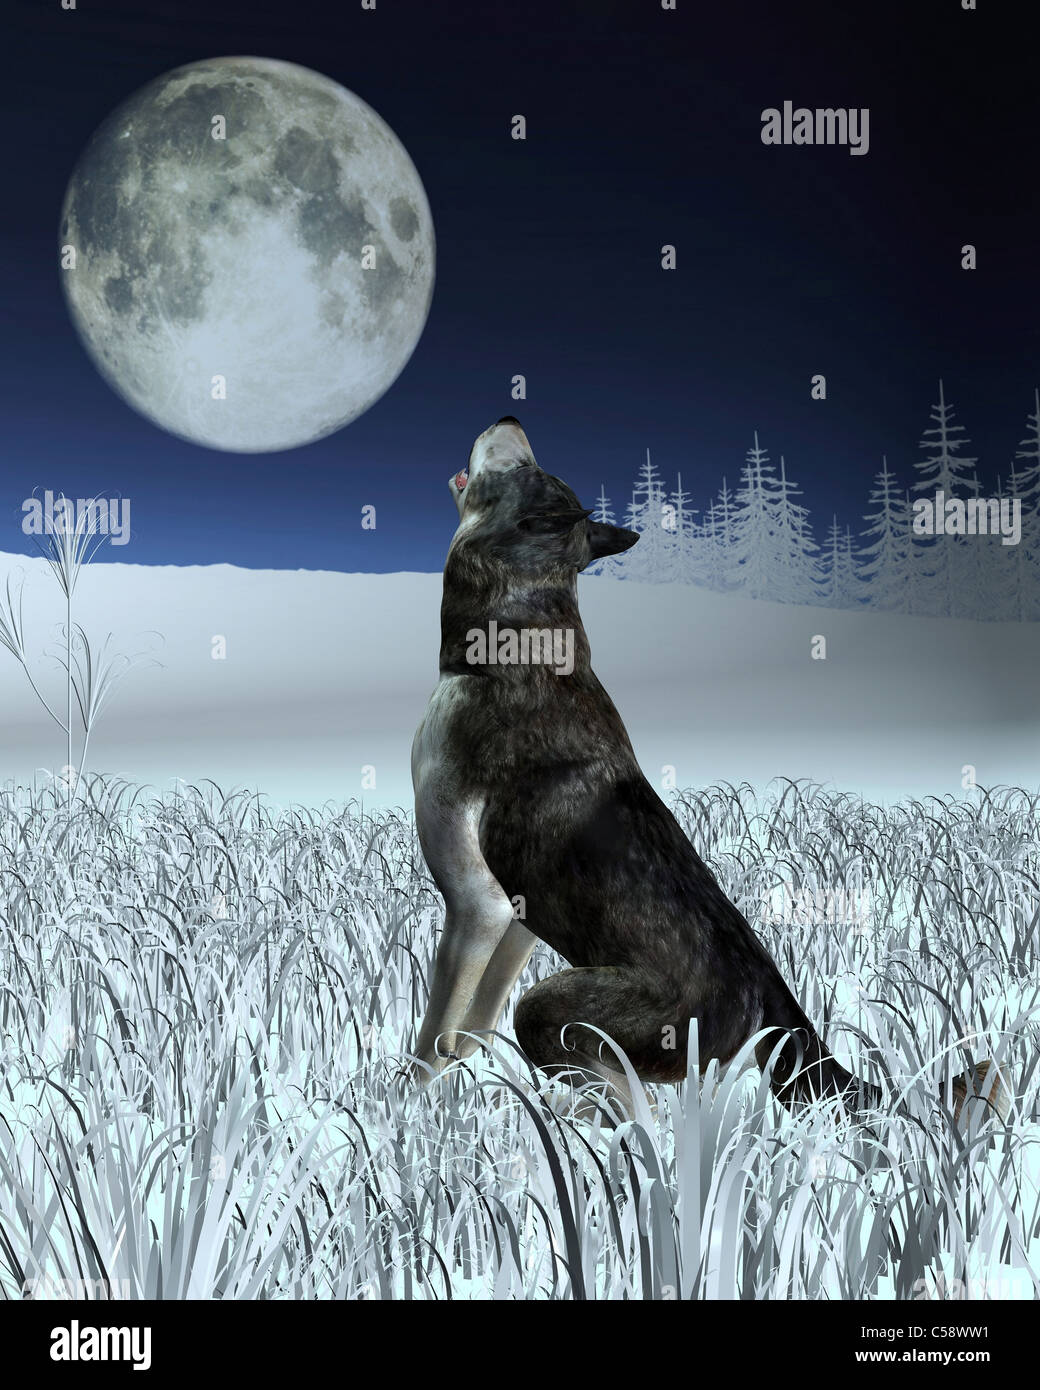 wolf howling at full moon drawing